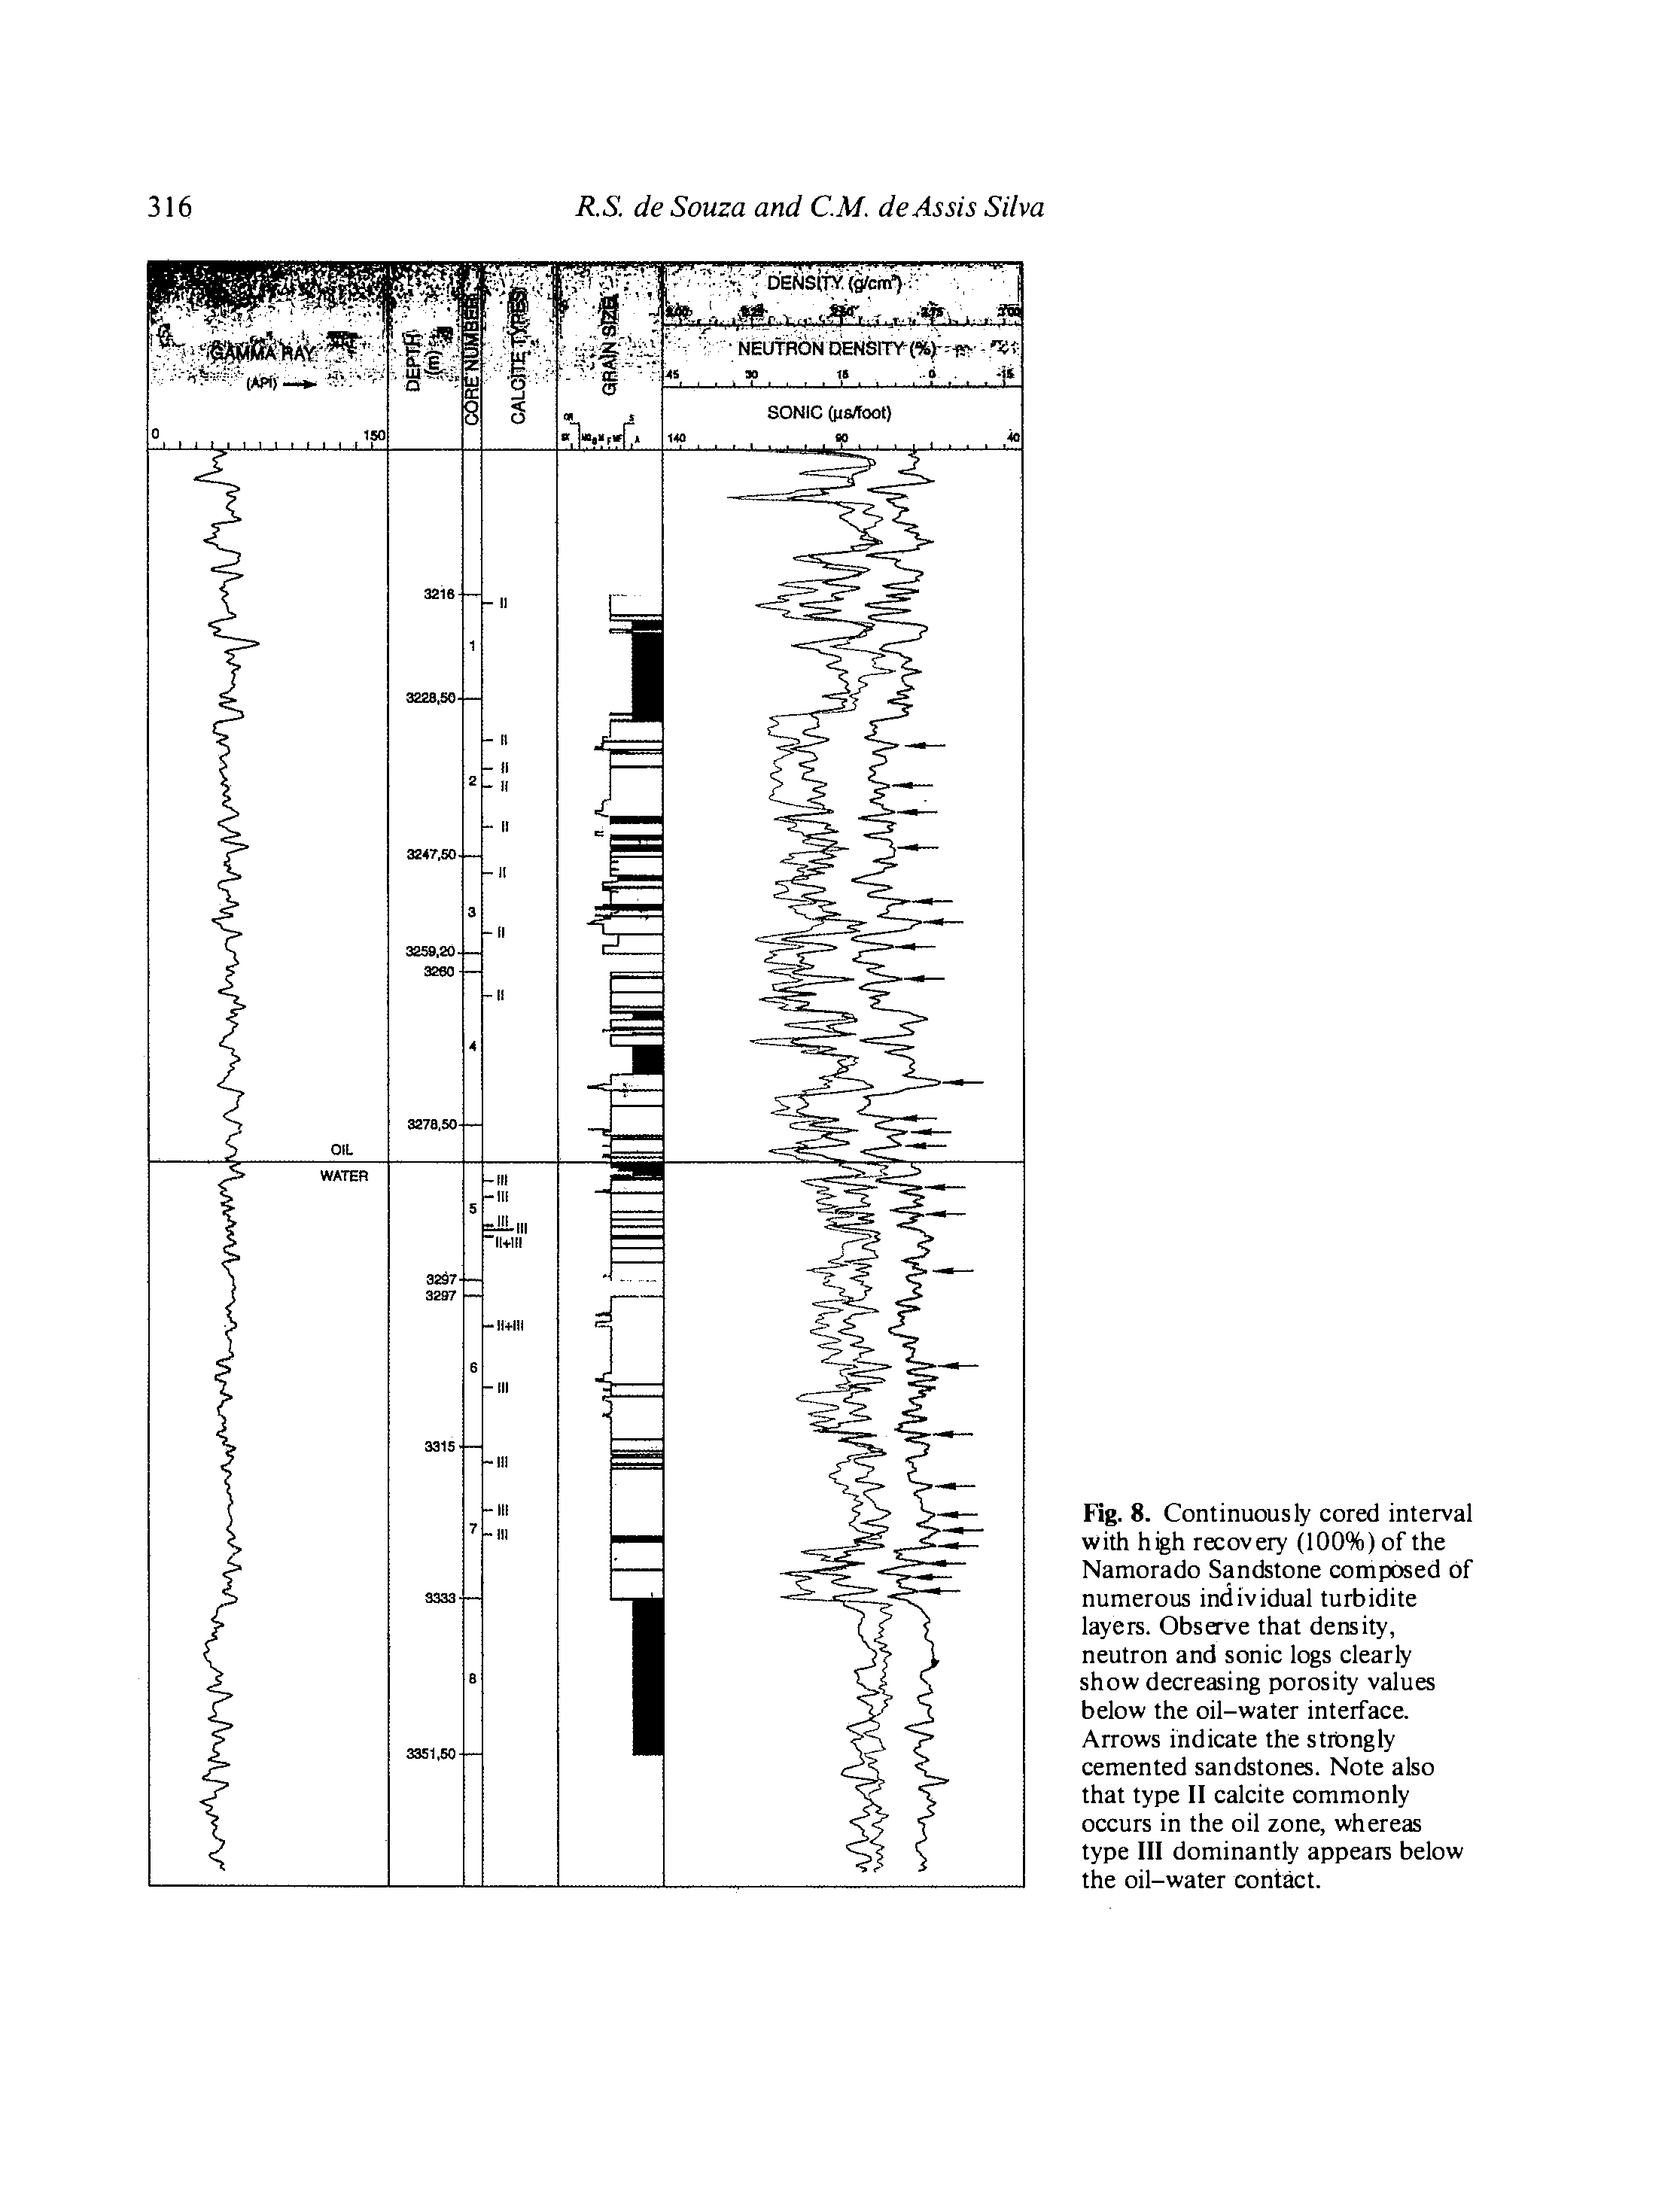 Fig. 8. Continuously cored interval with high recovery (100%) of the Namorado Sandstone composed of numerous individual turbidite layers. Observe that density, neutron and sonic logs clearly show decreasing porosity values below the oil-water interface. Arrows indicate the strongly cemented sandstones. Note also that type II calcite commonly occurs in the oil zone, whereas type III dominantly appears below the oil-water contact.